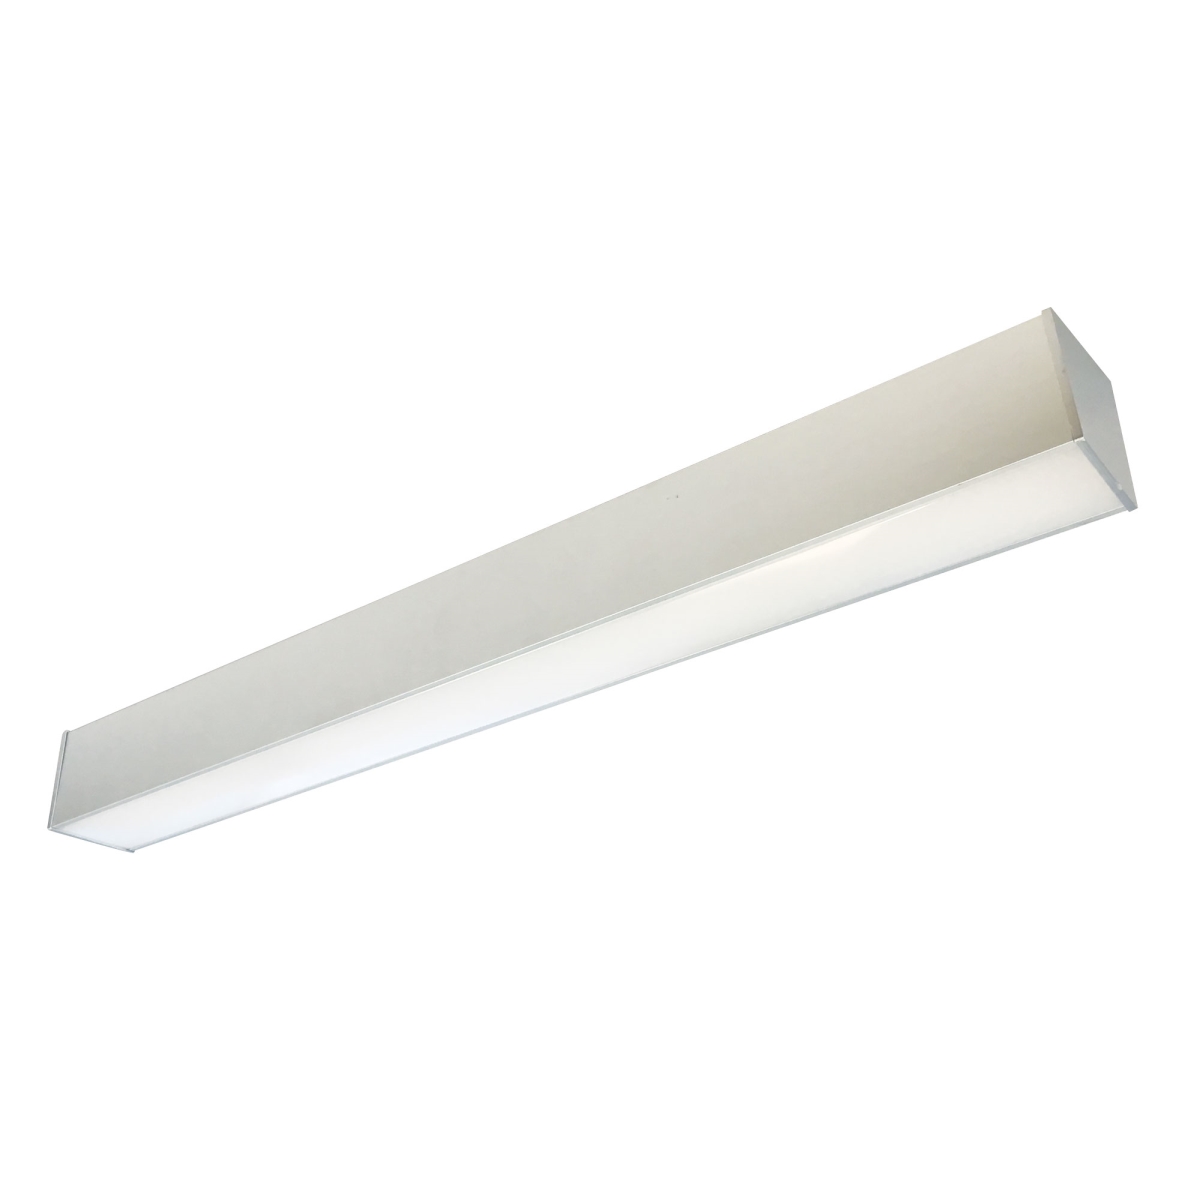 Picture of Nora Lighting NLIN-81030A-A 8 ft. 3000K L-line Linear LED, Aluminum